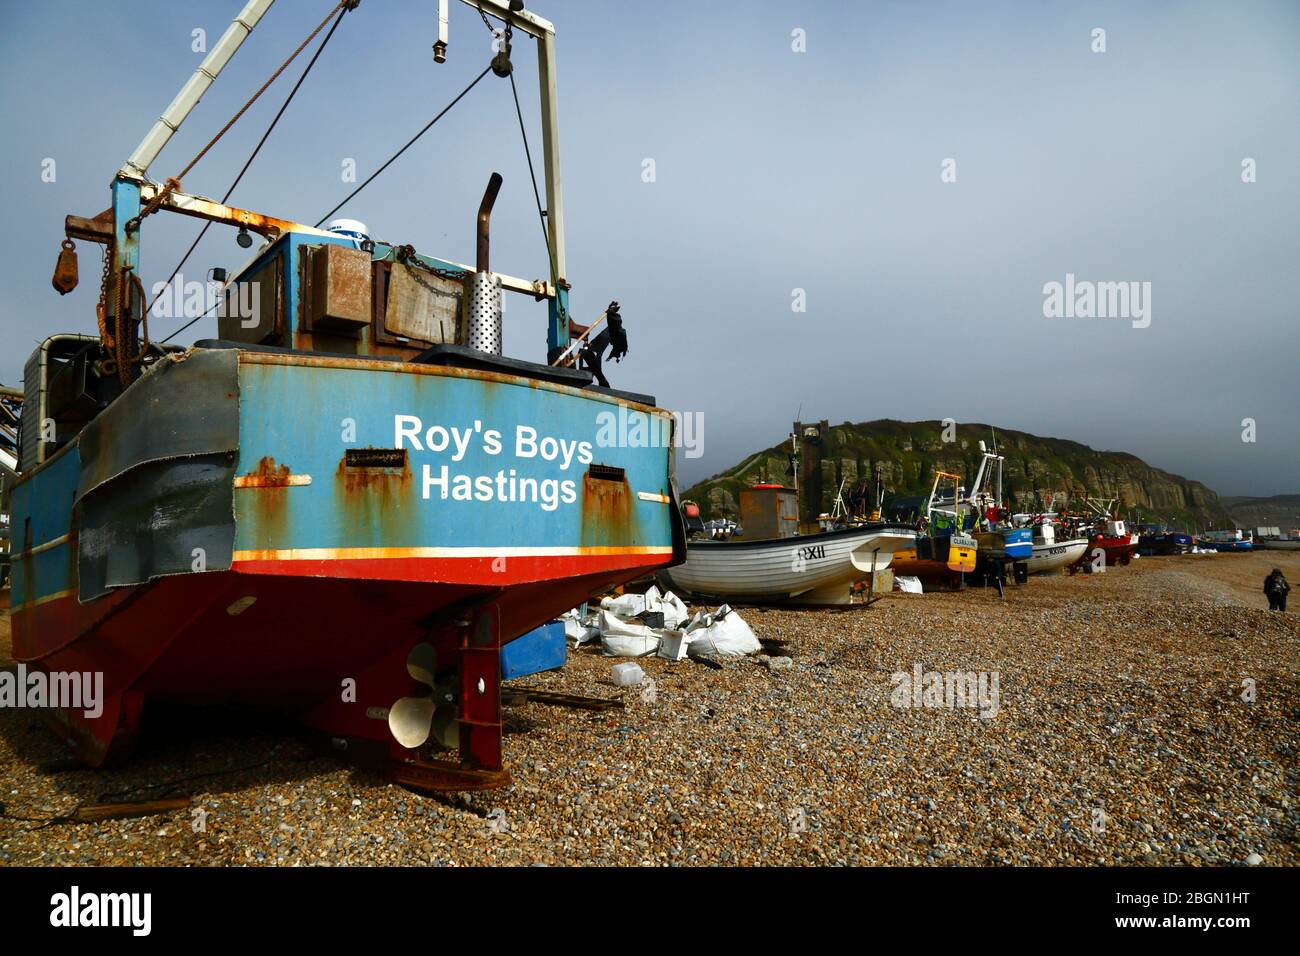 Roy's Boys fishing boat on The Stade  shingle beach below East Hill Cliff, Hastings, East Sussex, England, UK Stock Photo